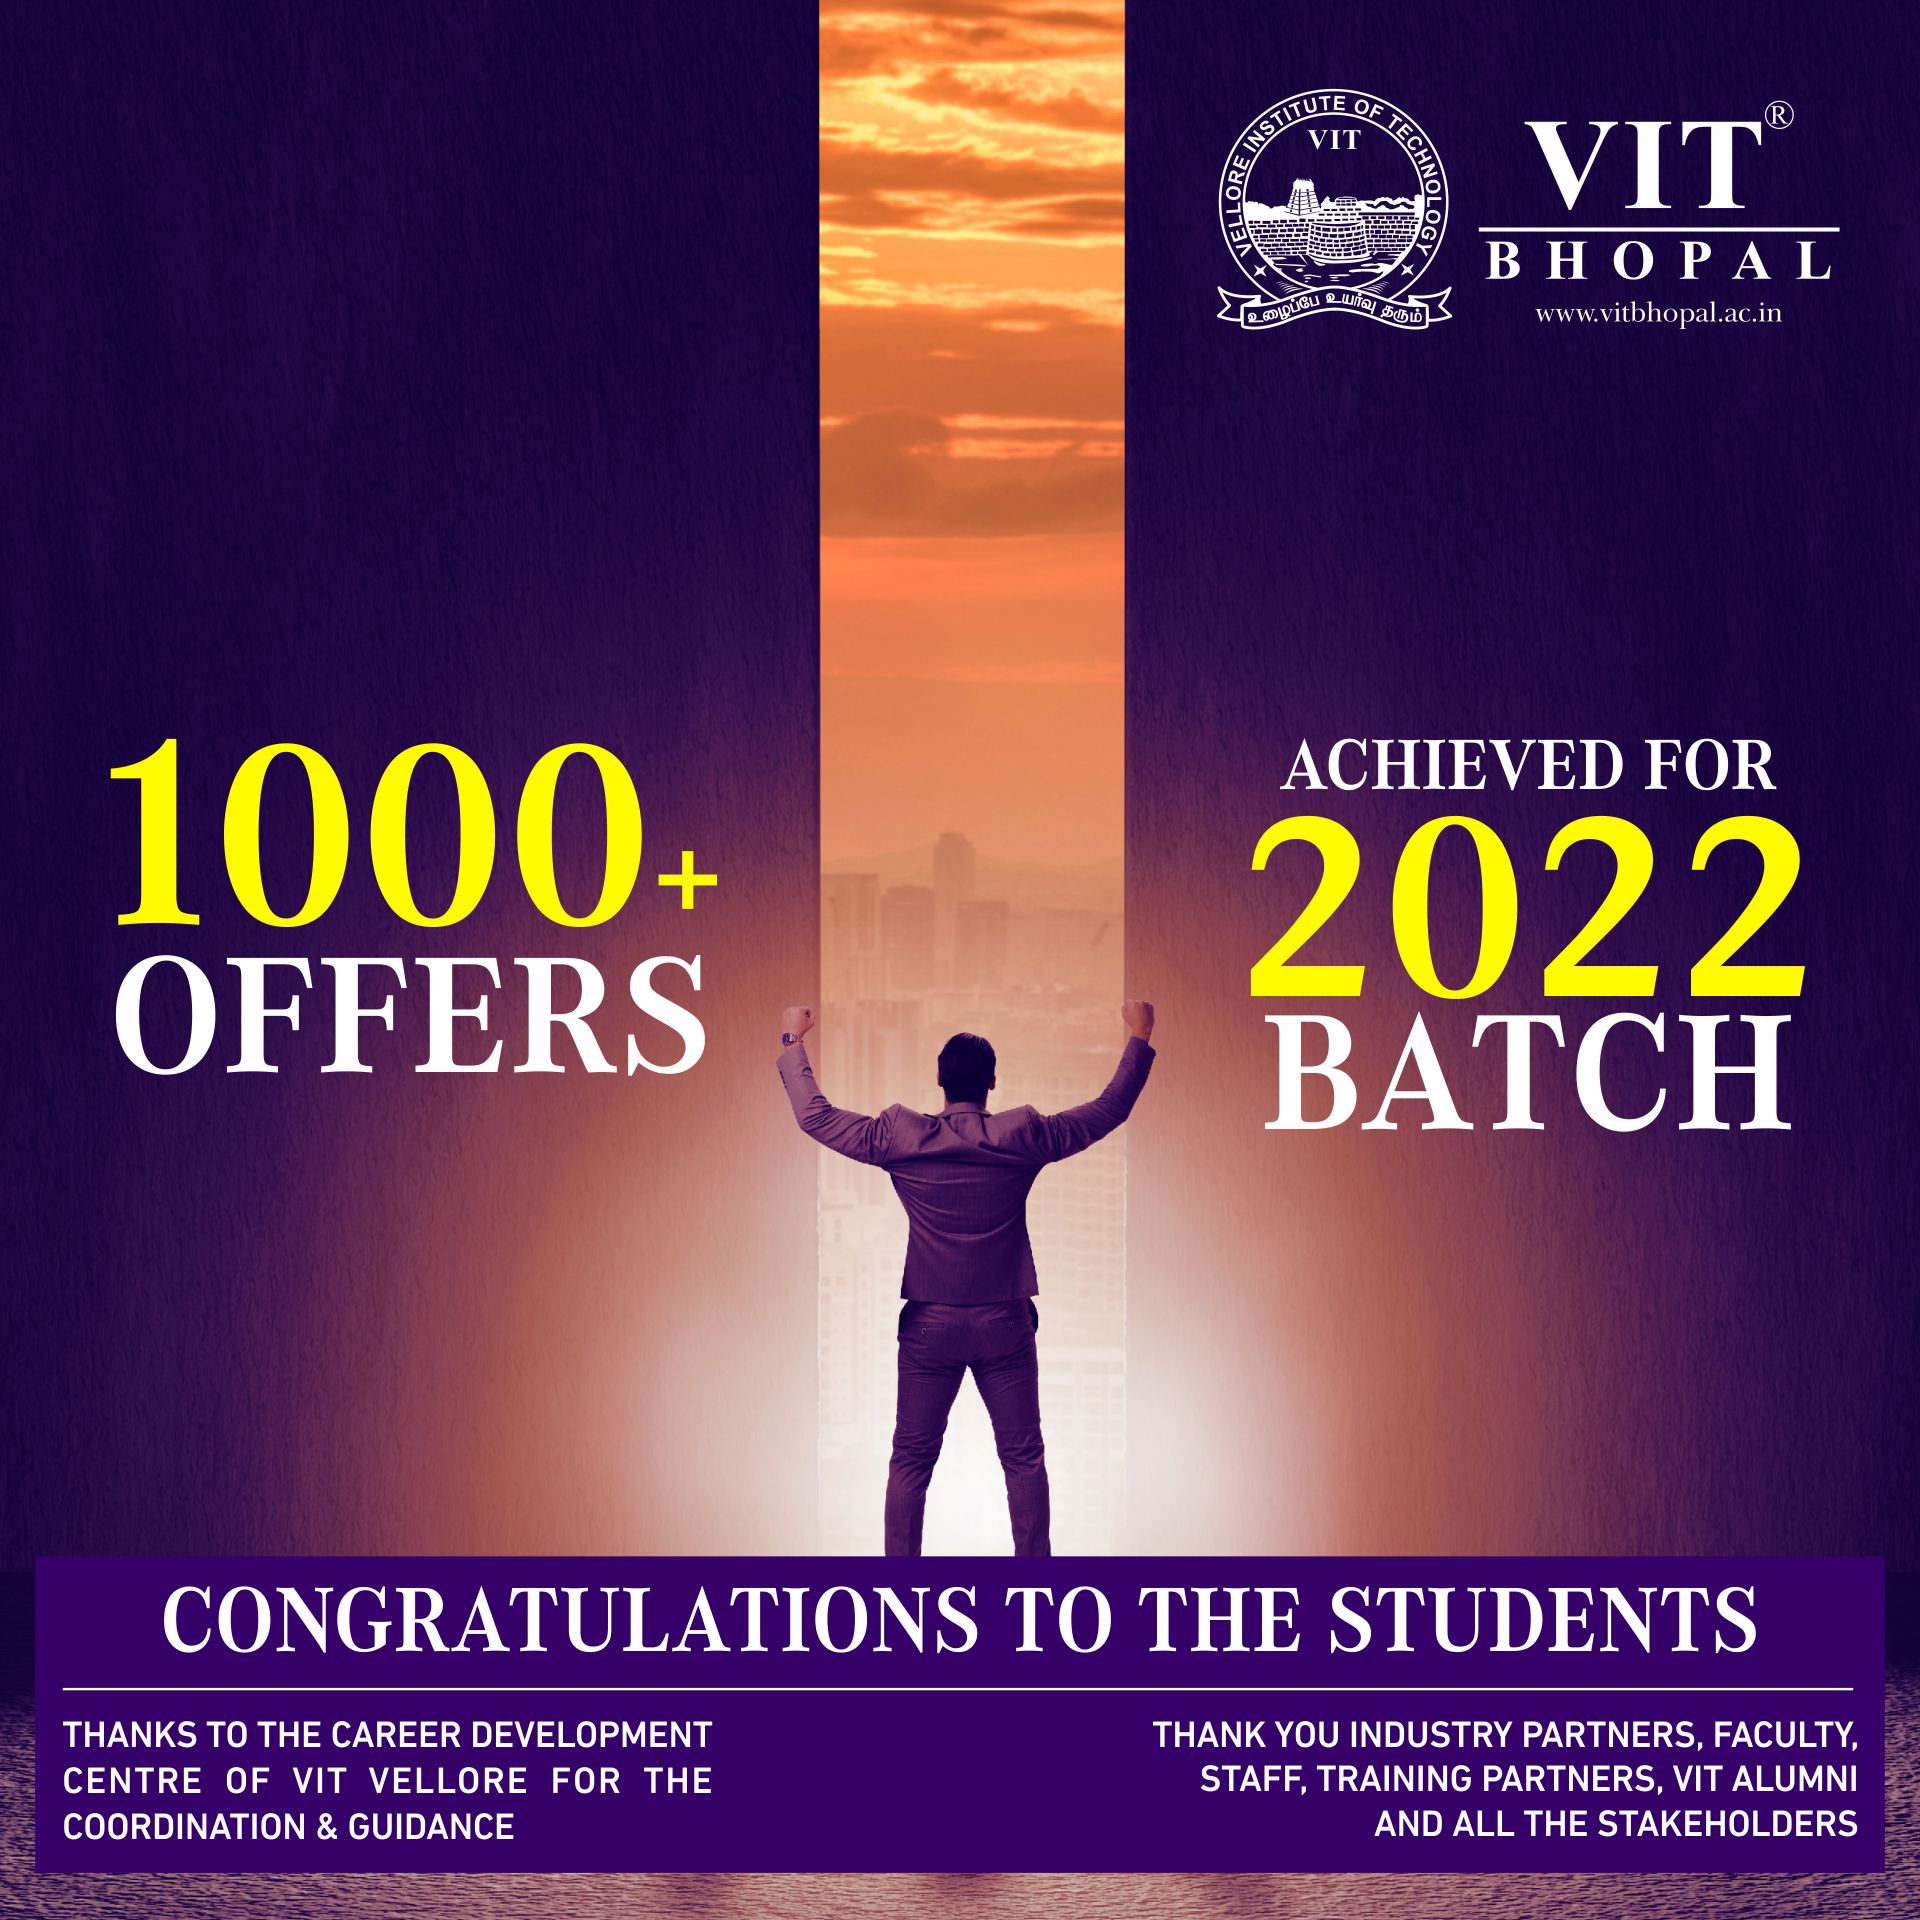 VIT Bhopal  - Best University in Central India -  Placement-Double-Century-1